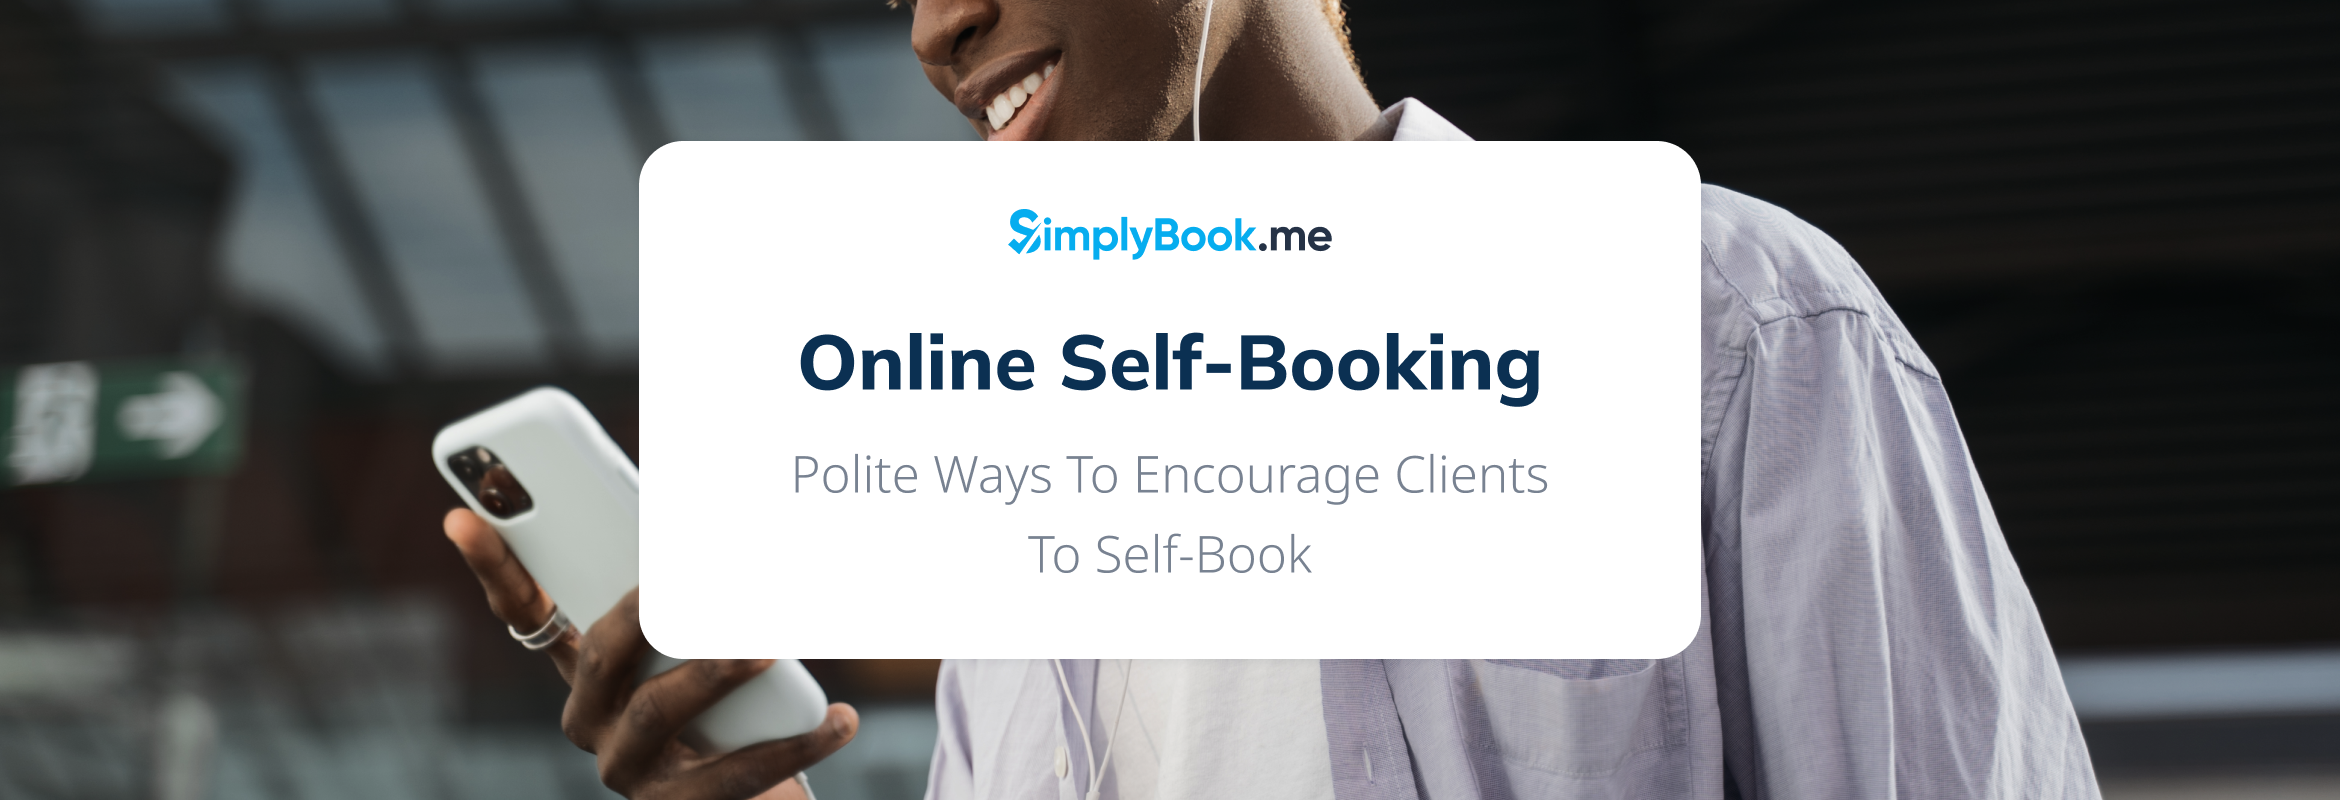 Online self-booking - Ways to make your clients self-book, but politely